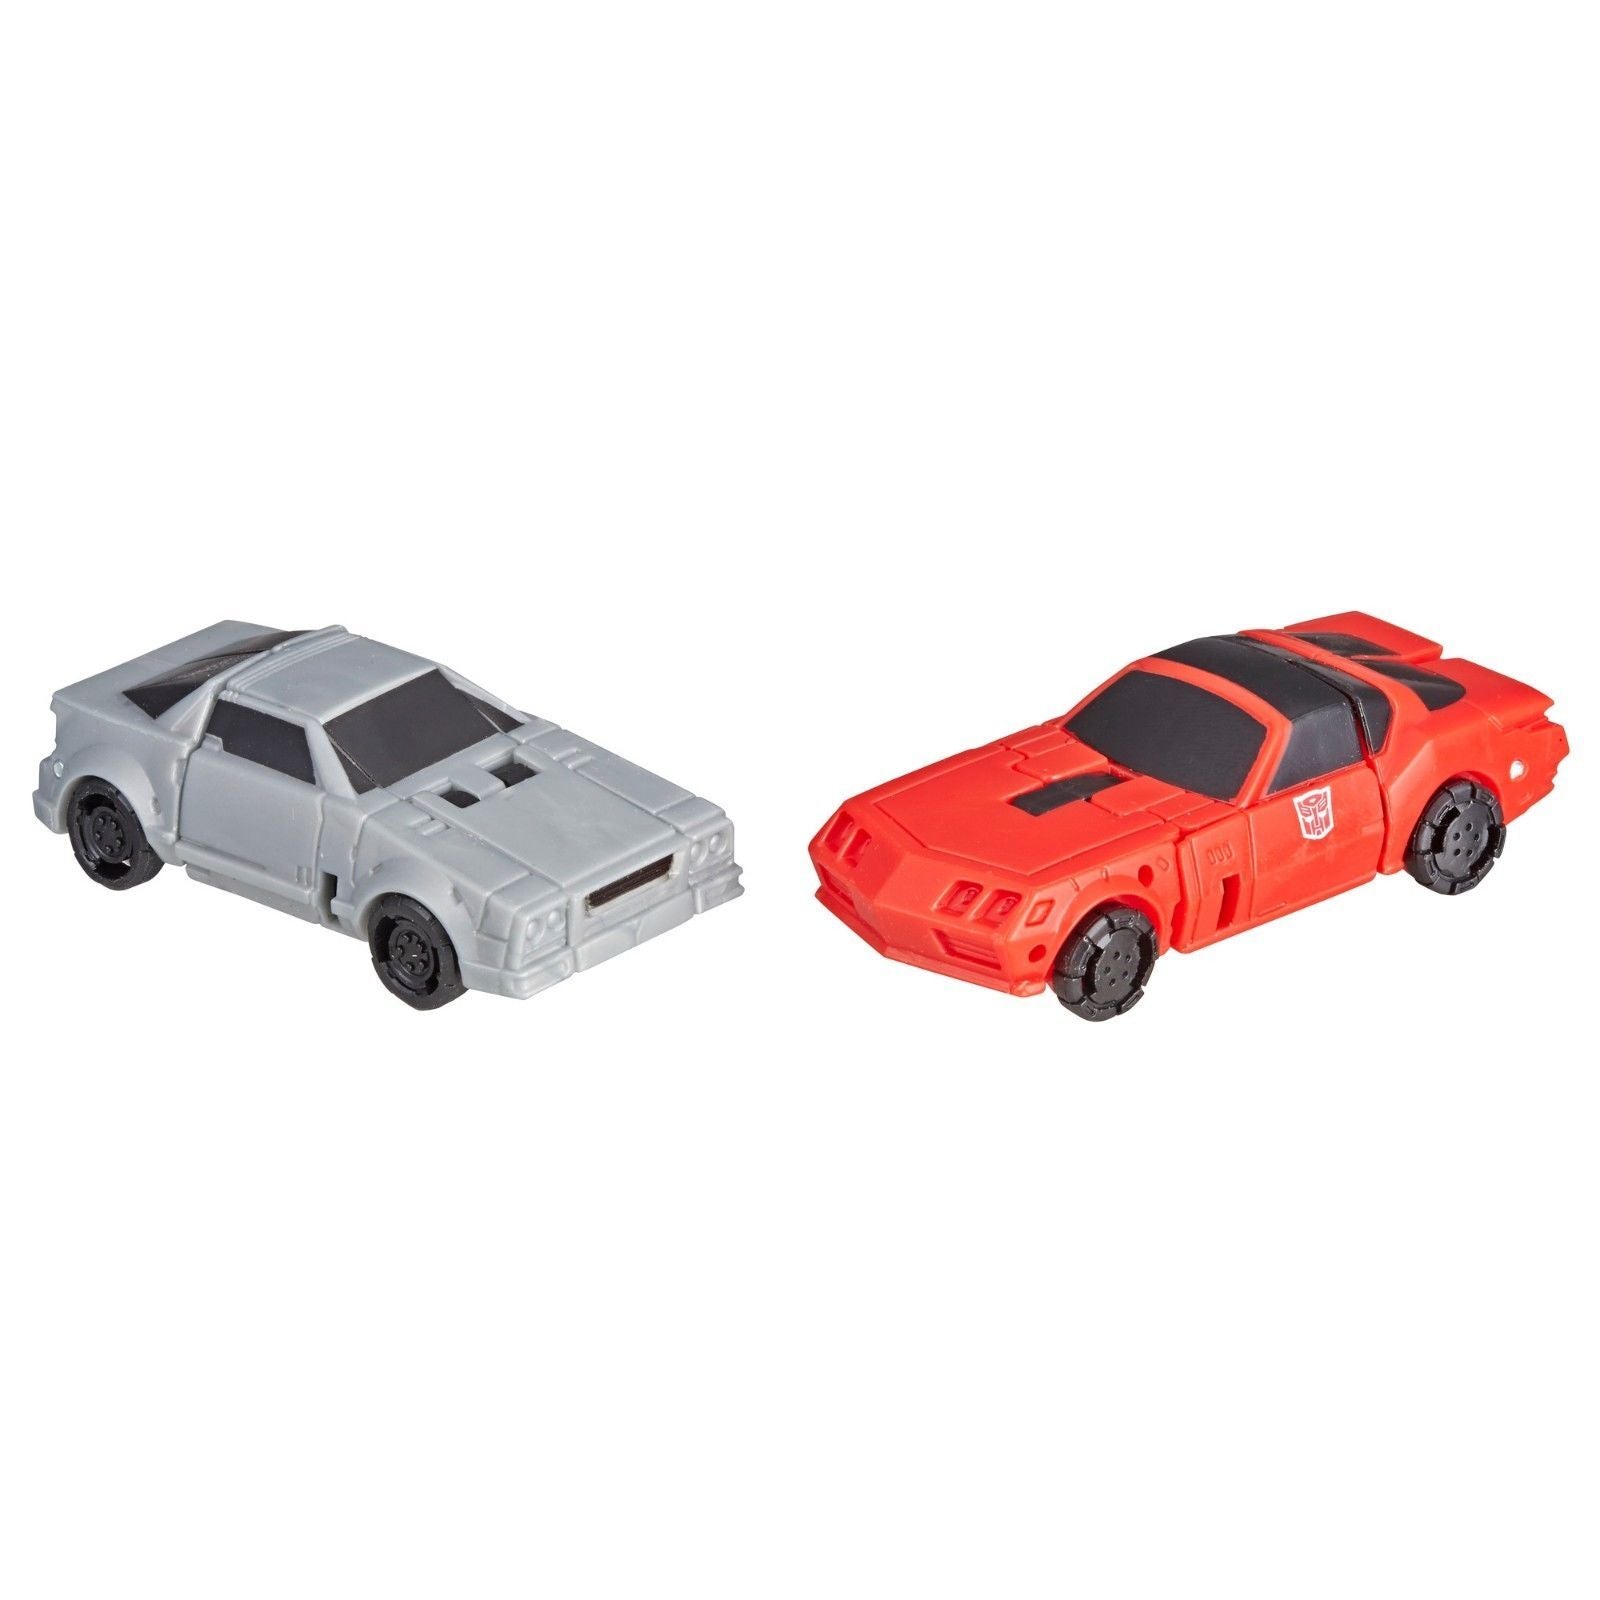 Transformers Generations War For Cybertron: Siege Micromaster Roadhandler & Swindler Action Figure WFC-S4